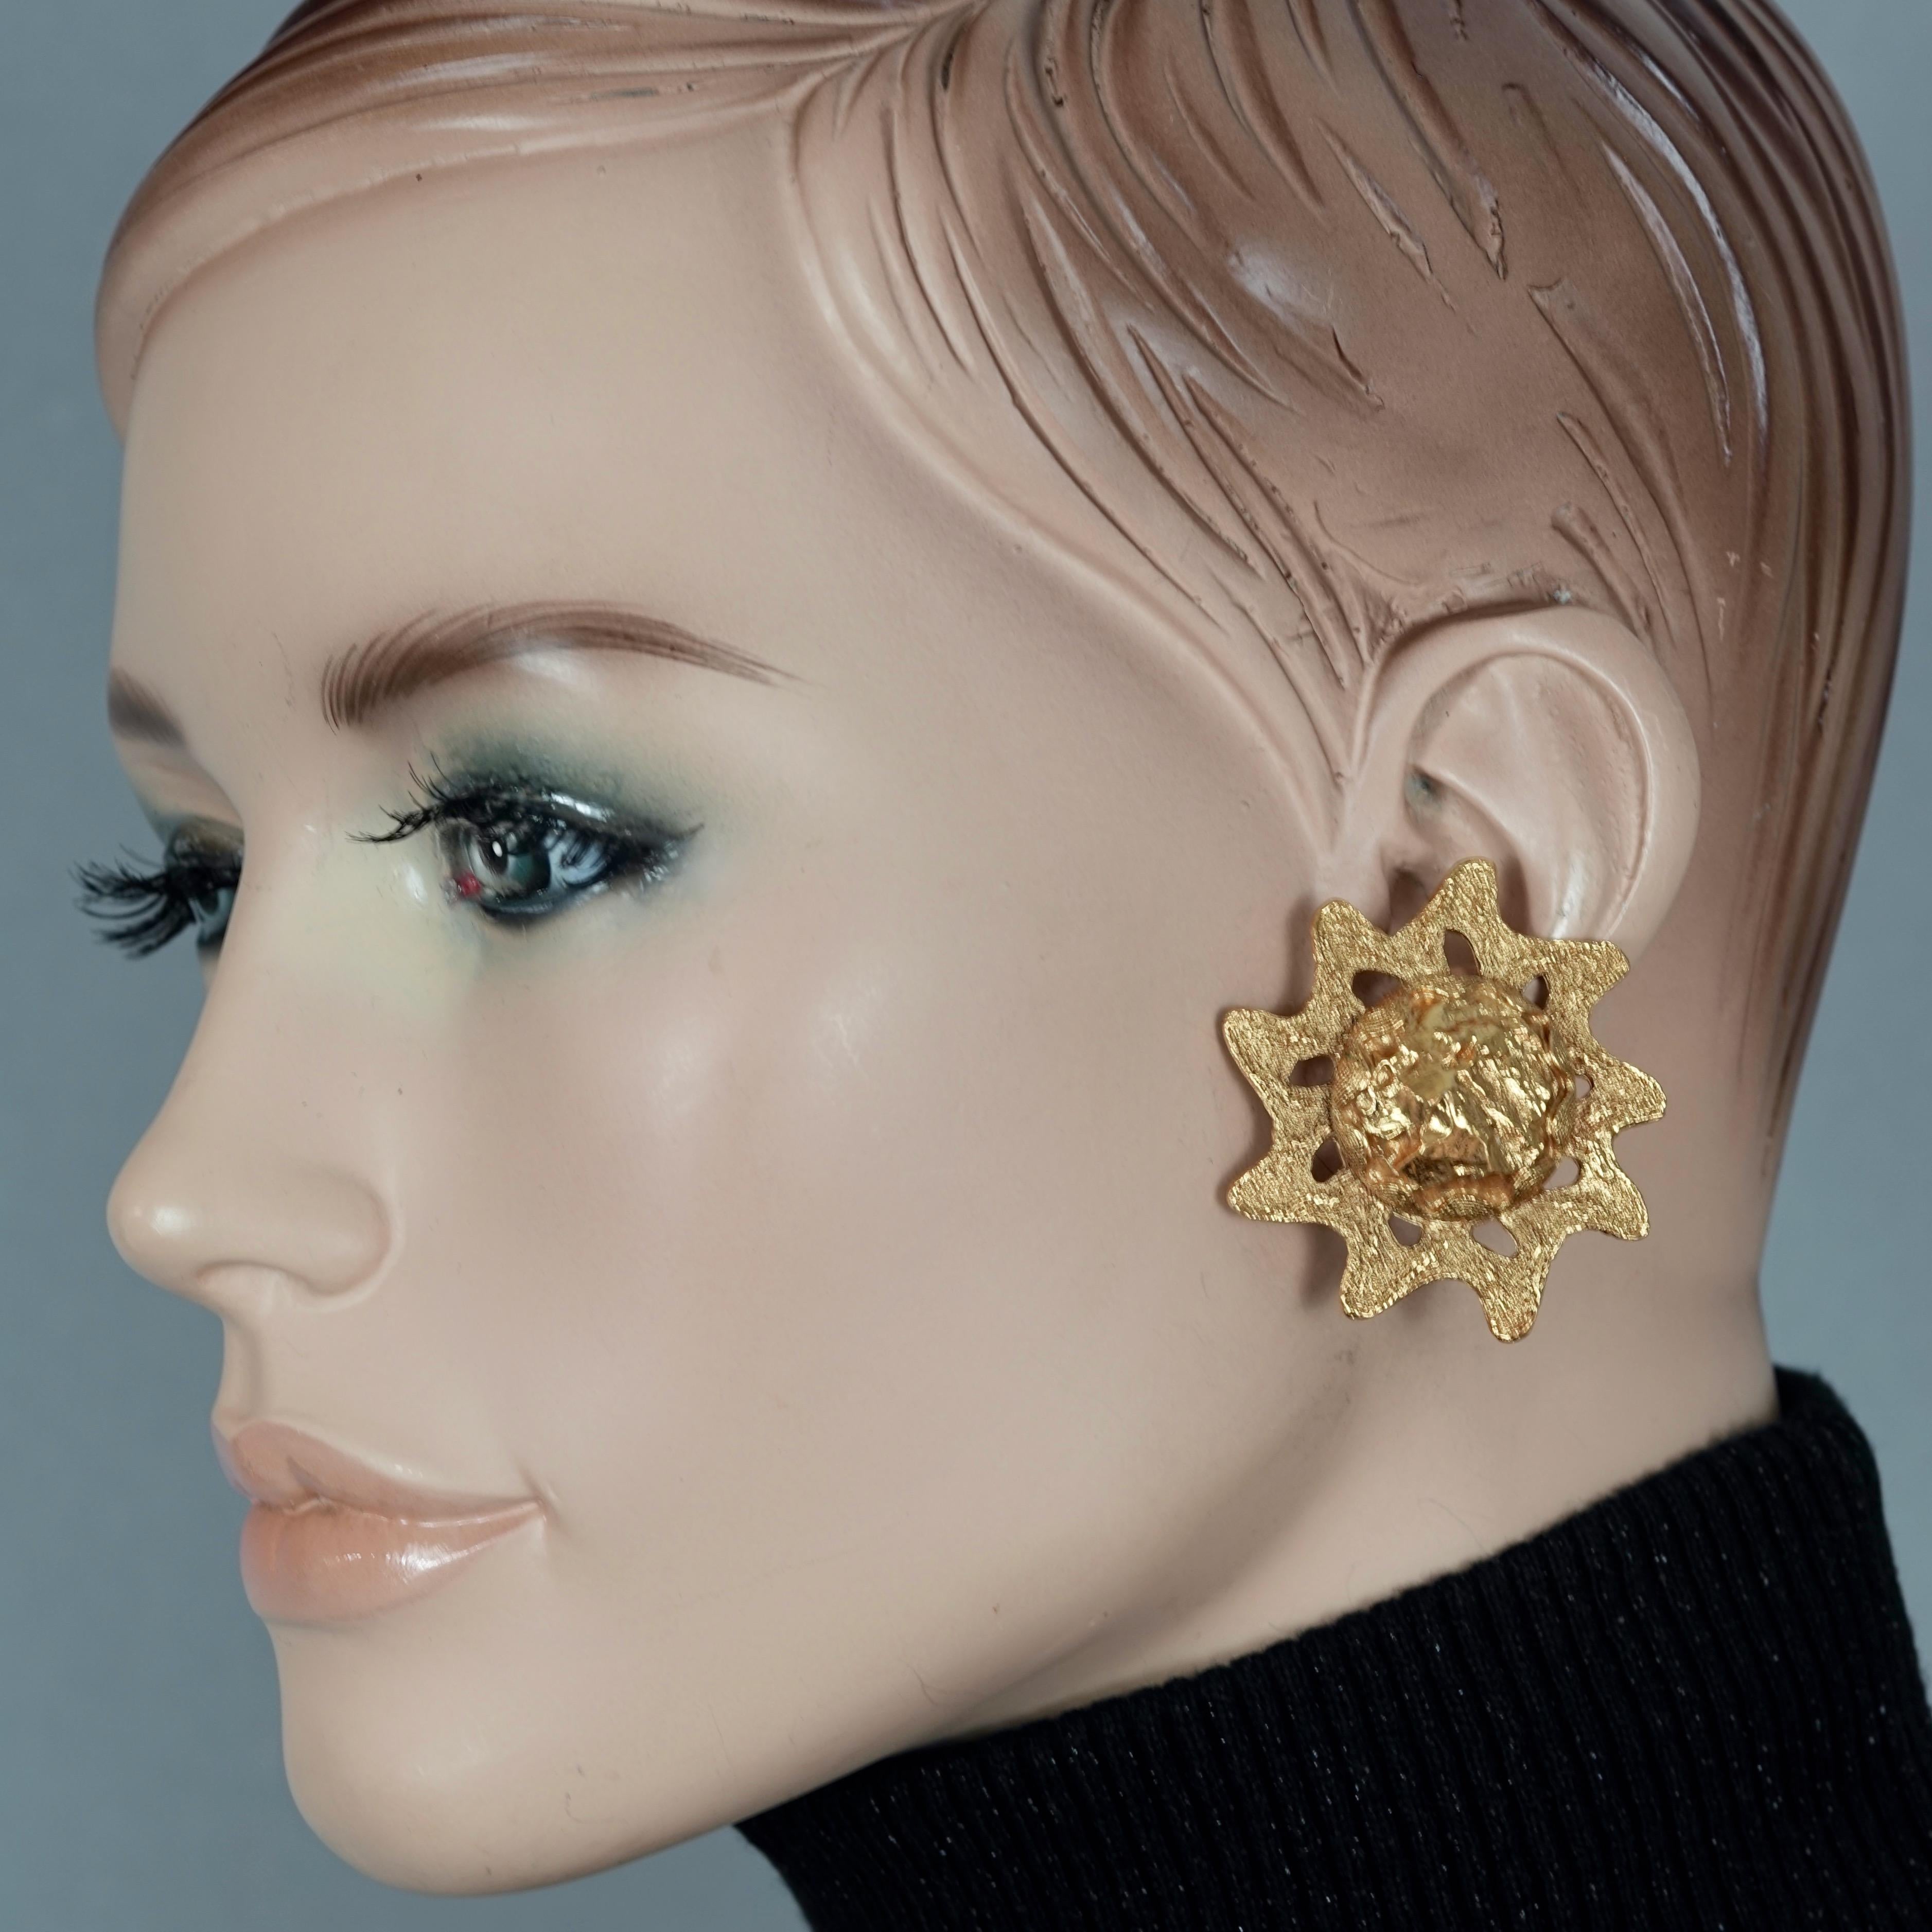 Vintage YVES SAINT LAURENT Sun Nugget by Robert Goossens Earrings

Measurements:
Height: 1.73 inches (4.4 cm)
Width: 1.73 inches (4.4 cm)
Weight per Earring: 19 grams

Features:
- 100% Authentic YVES SAINT LAURENT.
- Chunky sun with raised textured